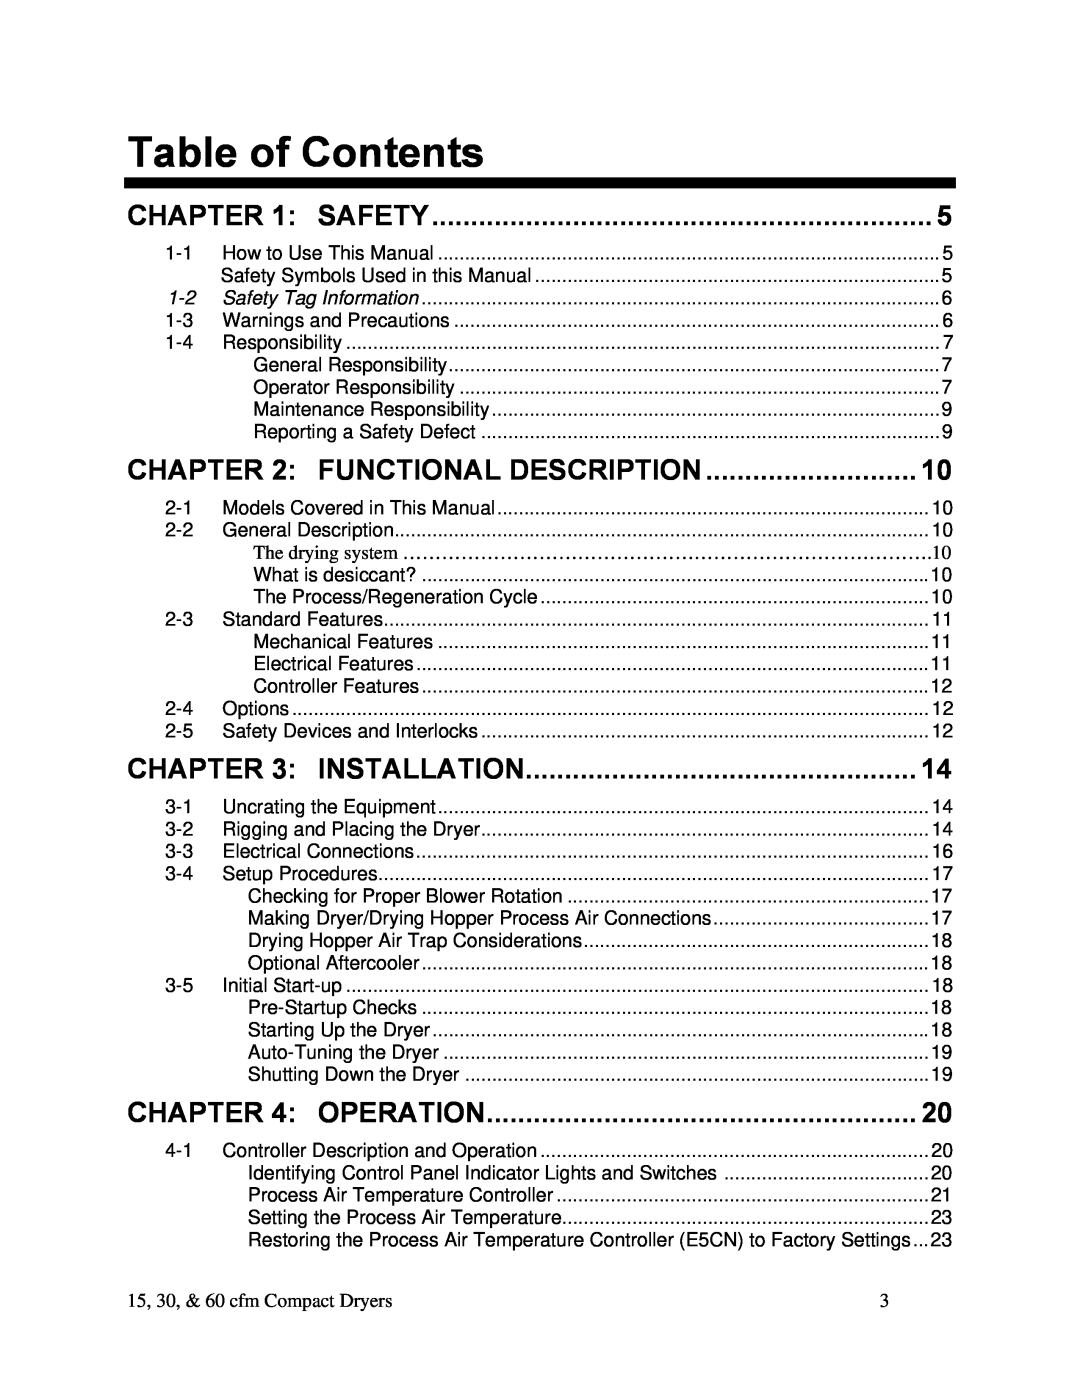 Sterling SDA Series 25-100 specifications Table of Contents, Functional Description, Installation, Operation, Safety 